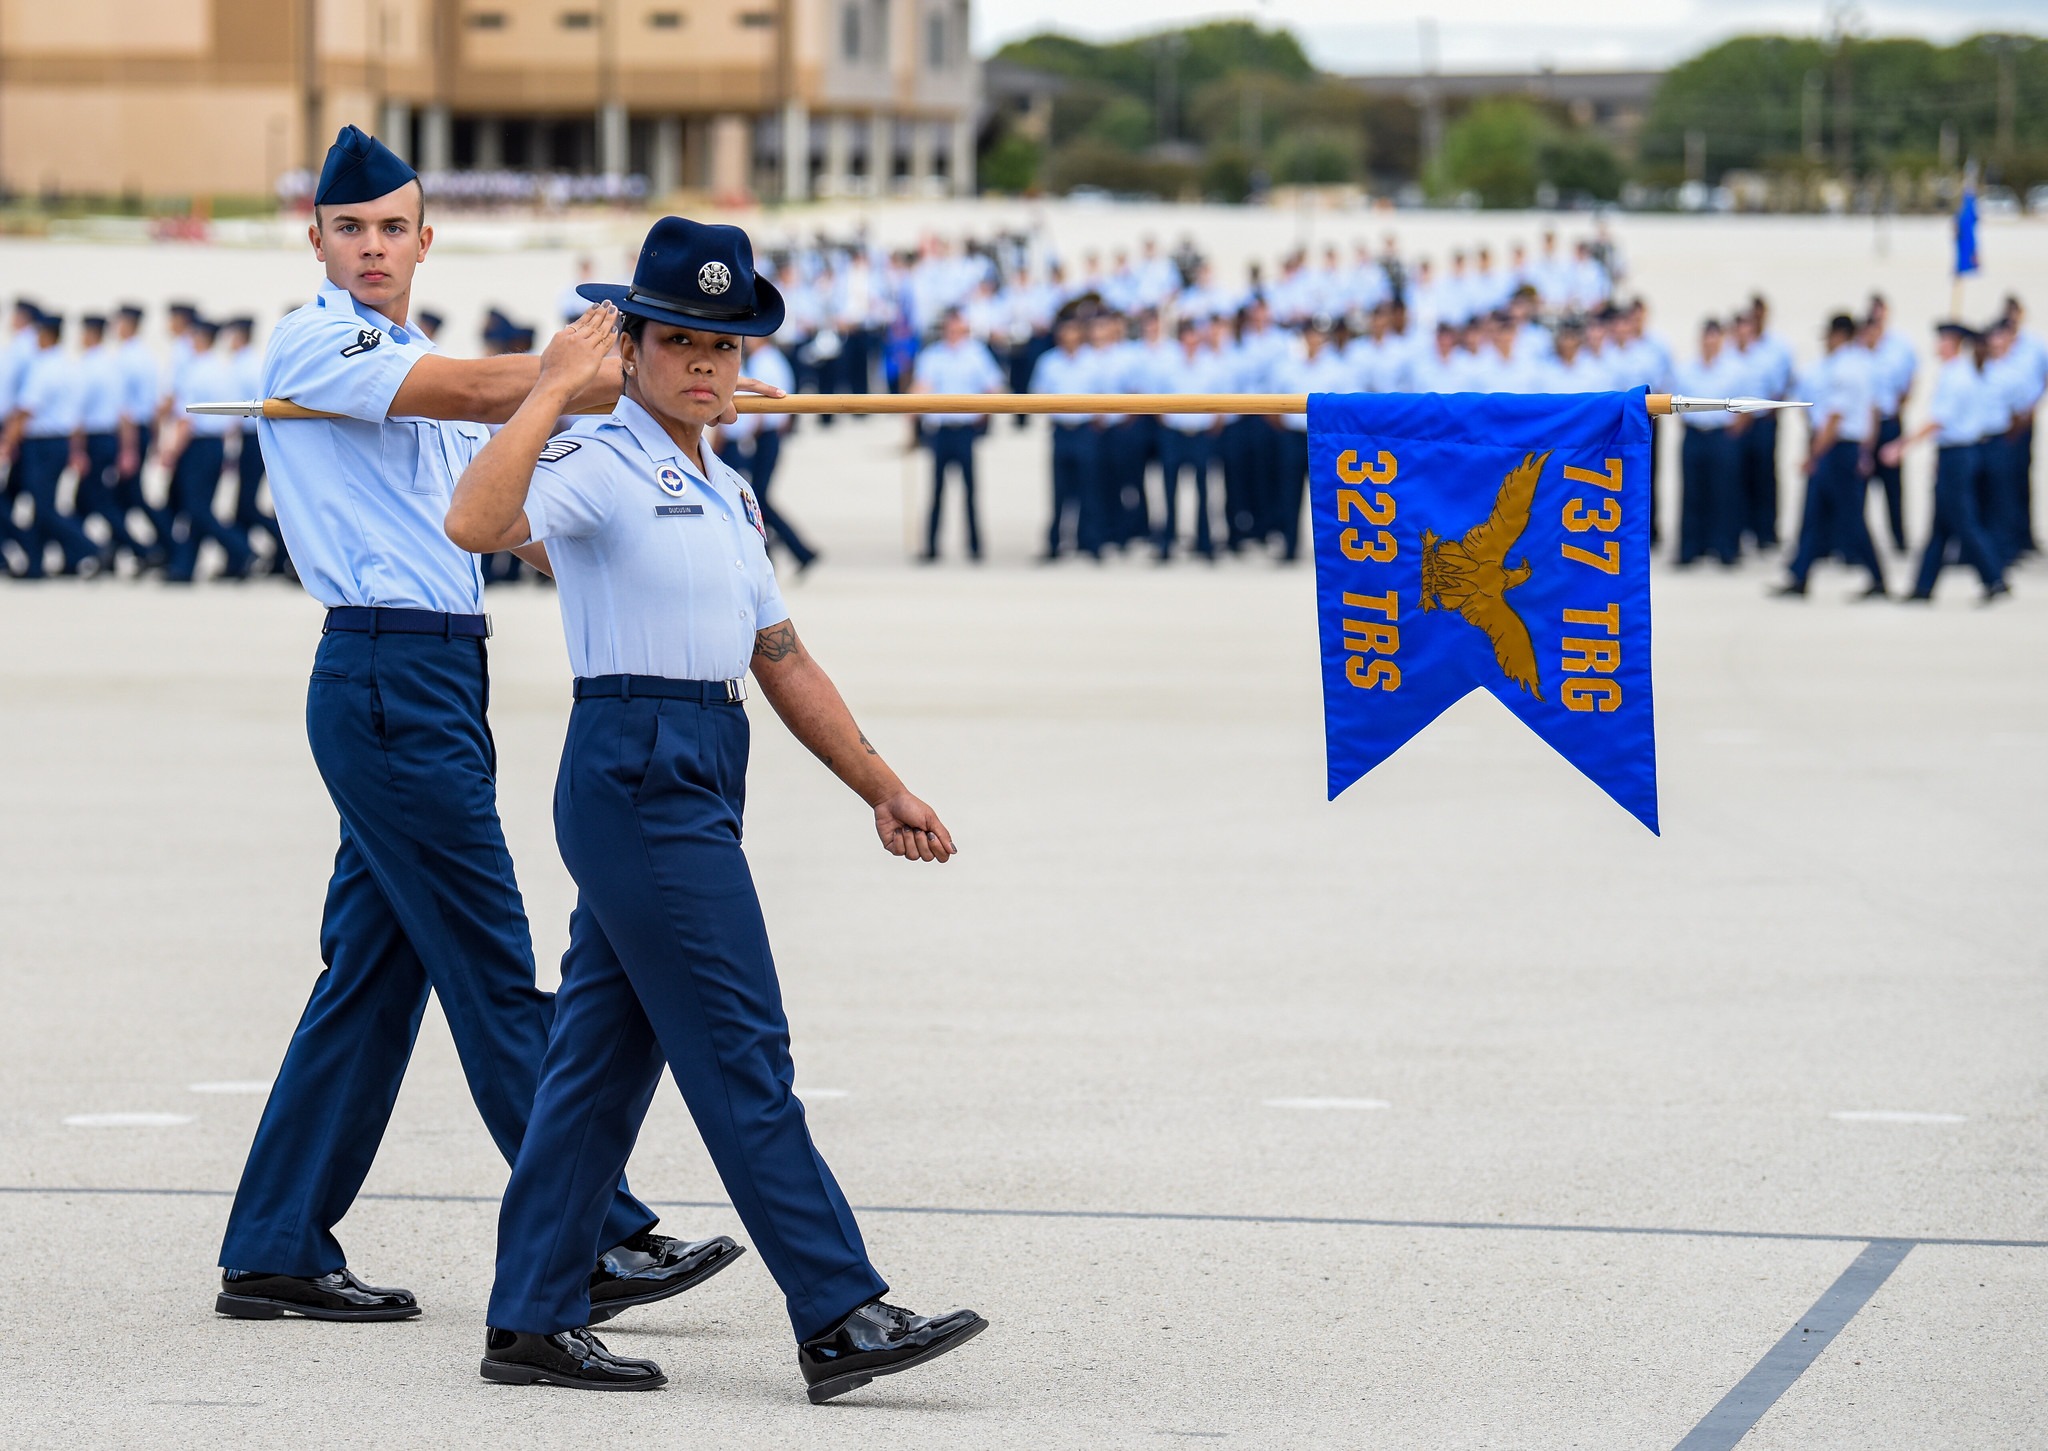 bmt-increases-guests-adds-airman-s-run-to-graduation-ceremony-air